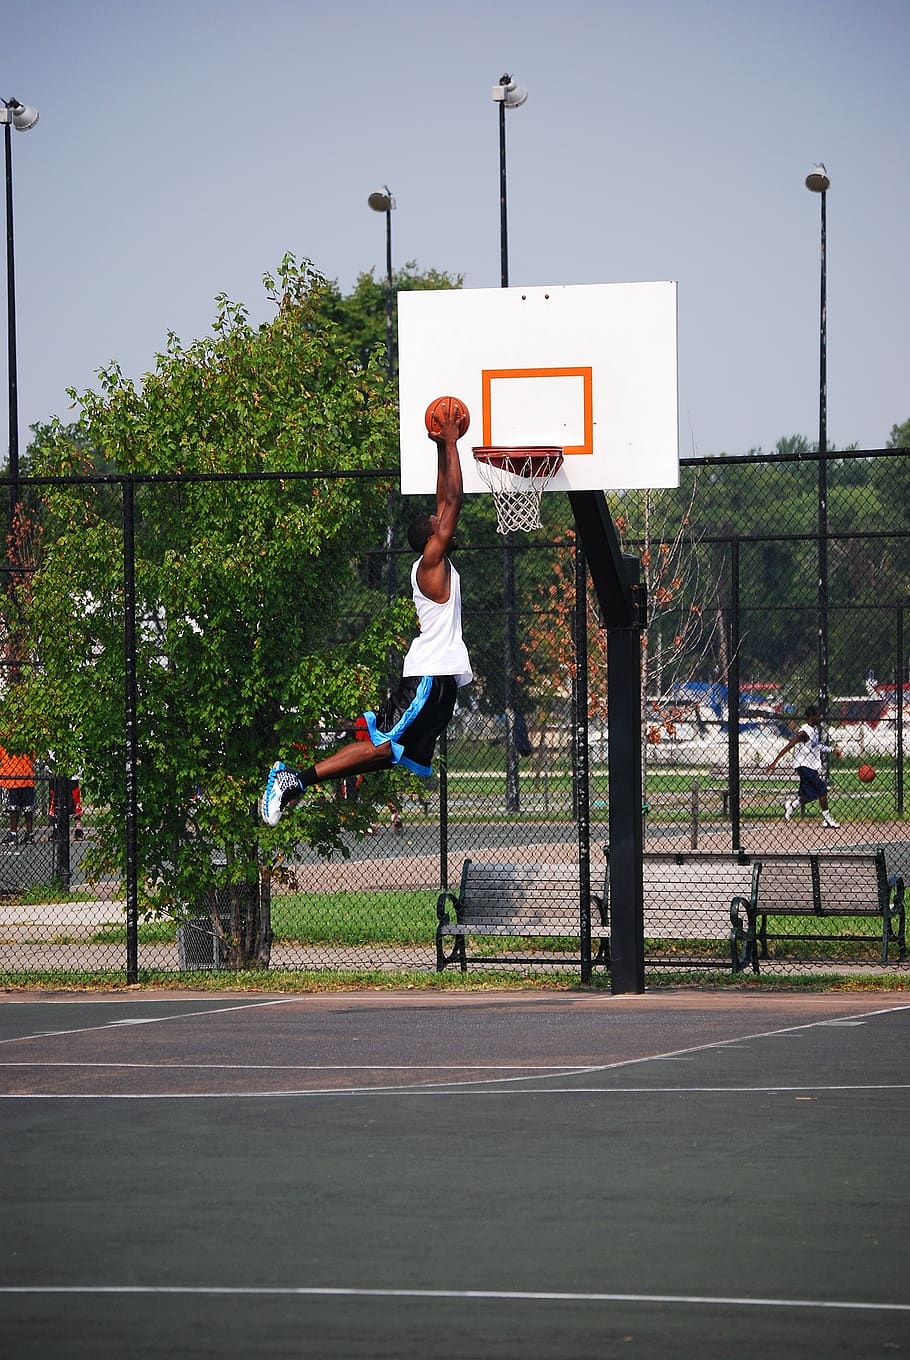 basketball, player, sport, athletic, recreation, court, dunk